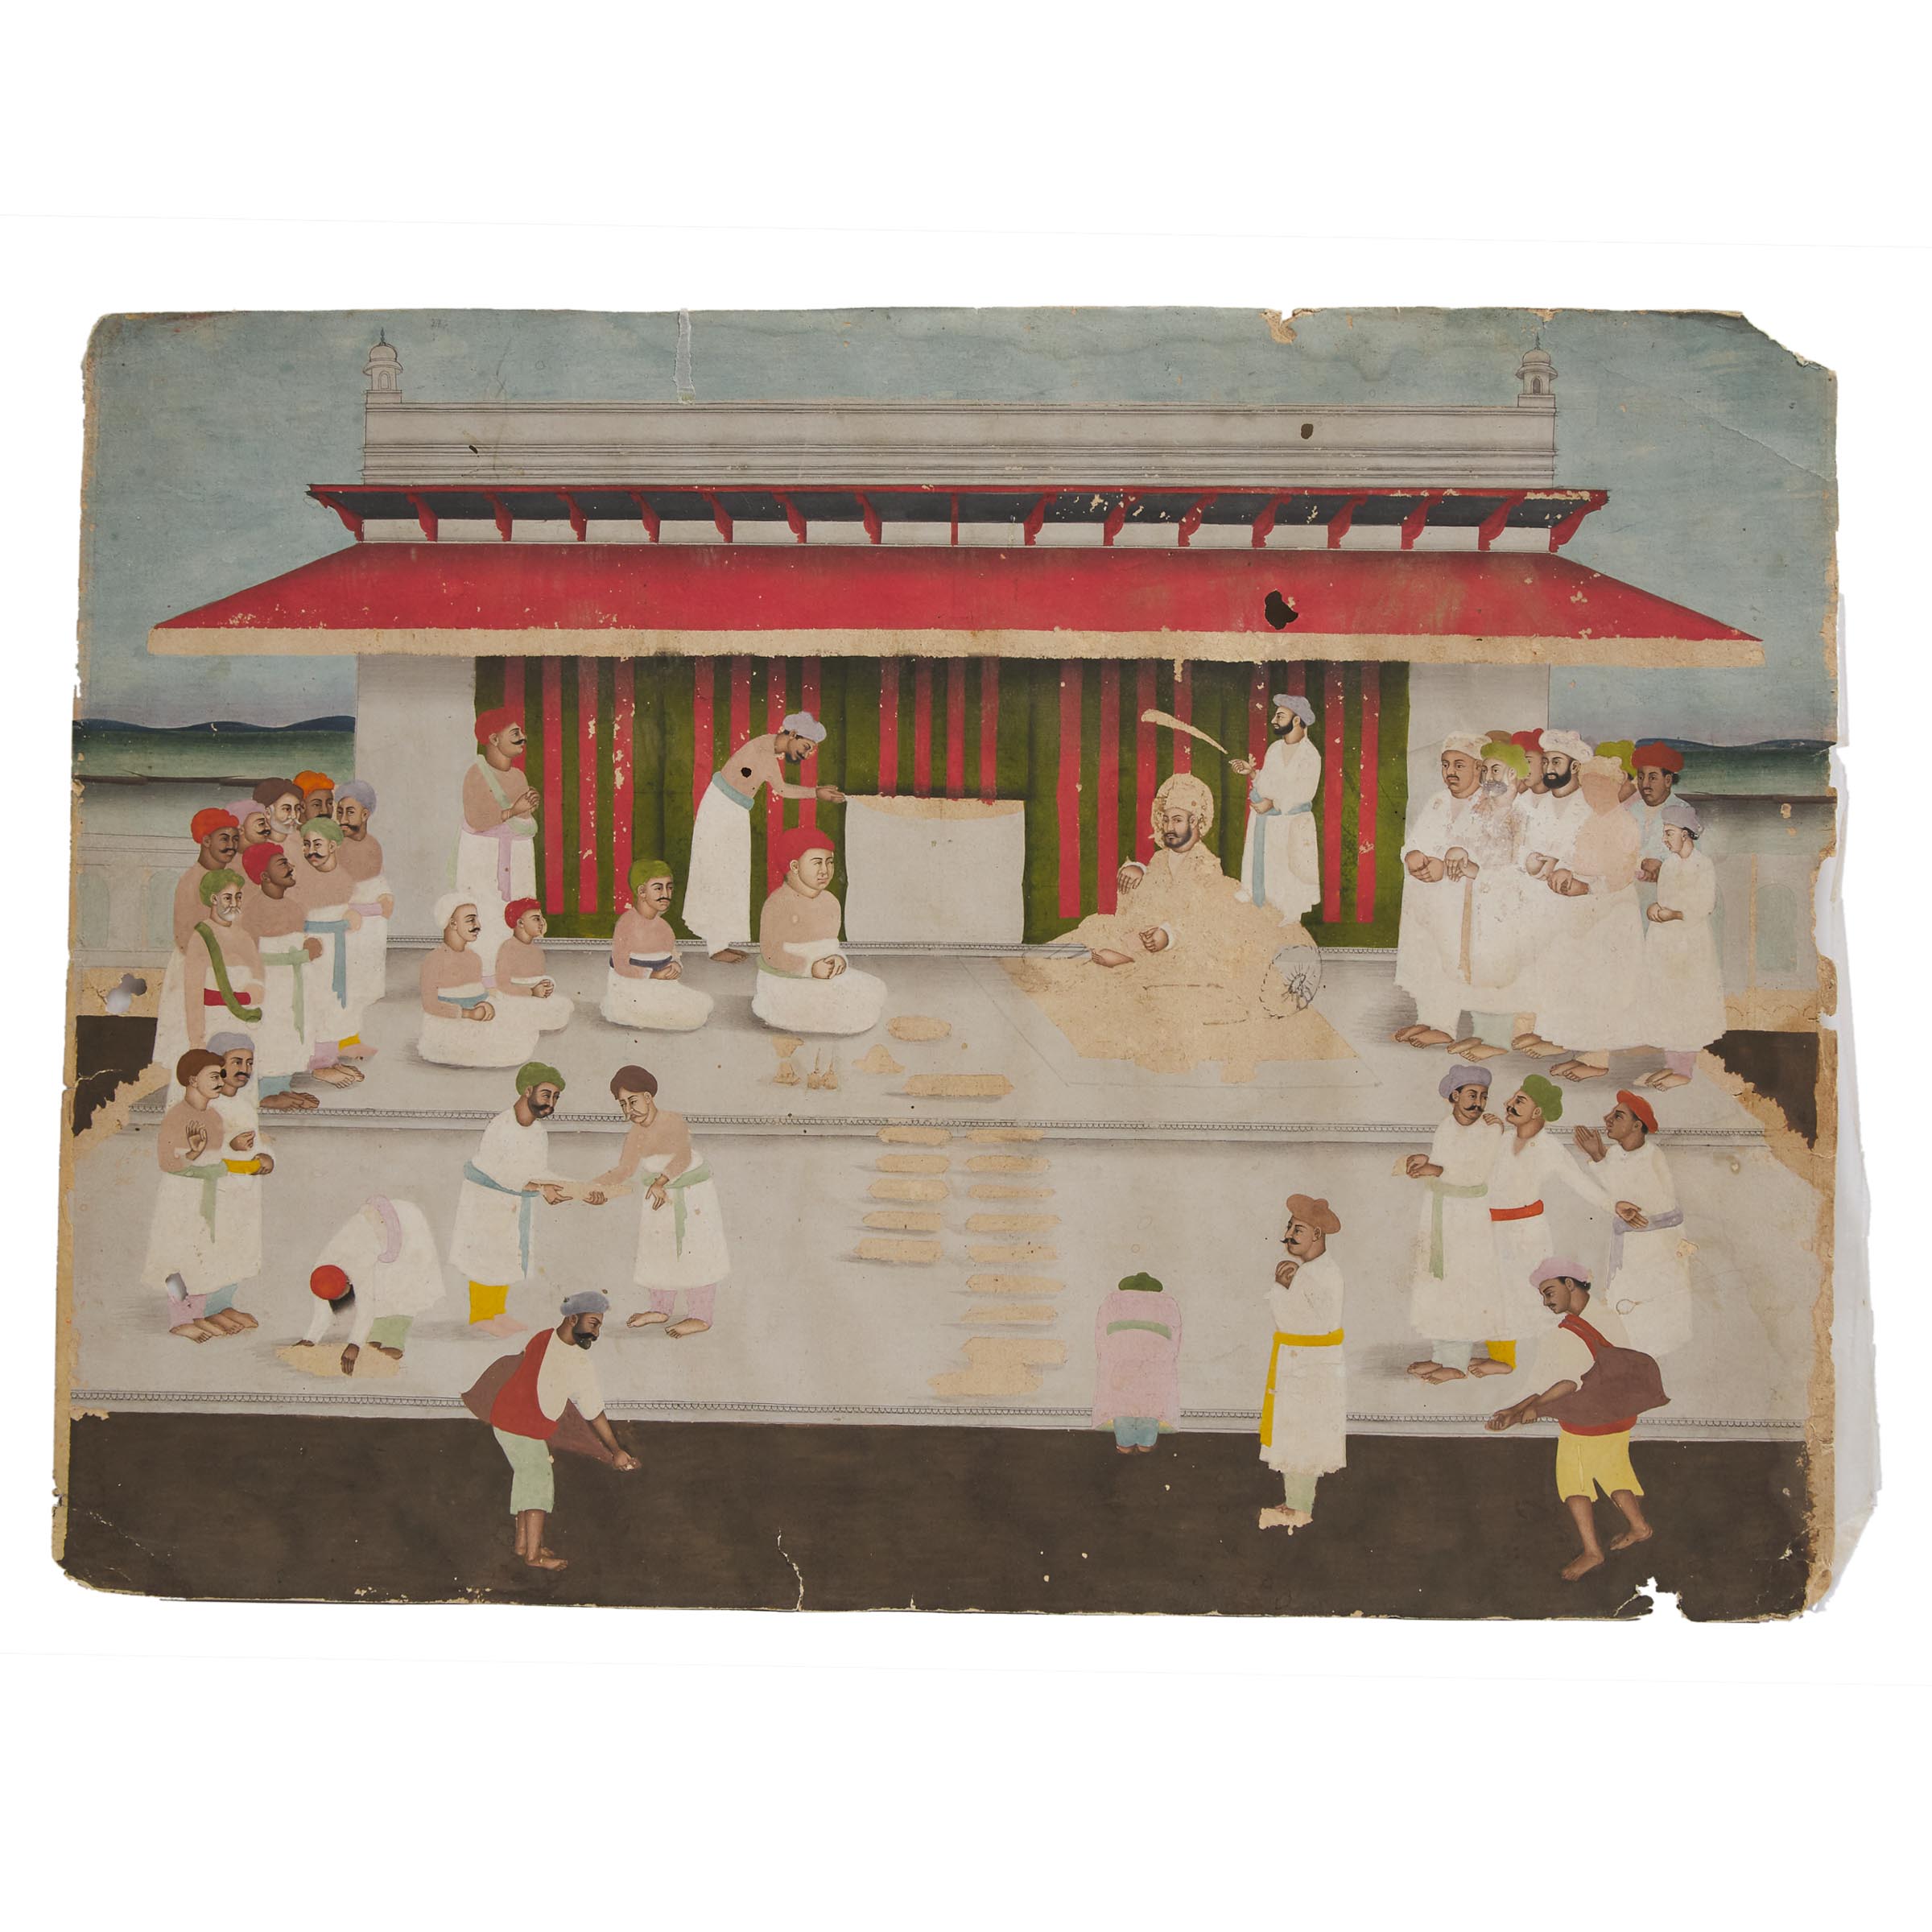 A Large and Incomplete Indian Miniature Painting of a Durbar, 19th Century